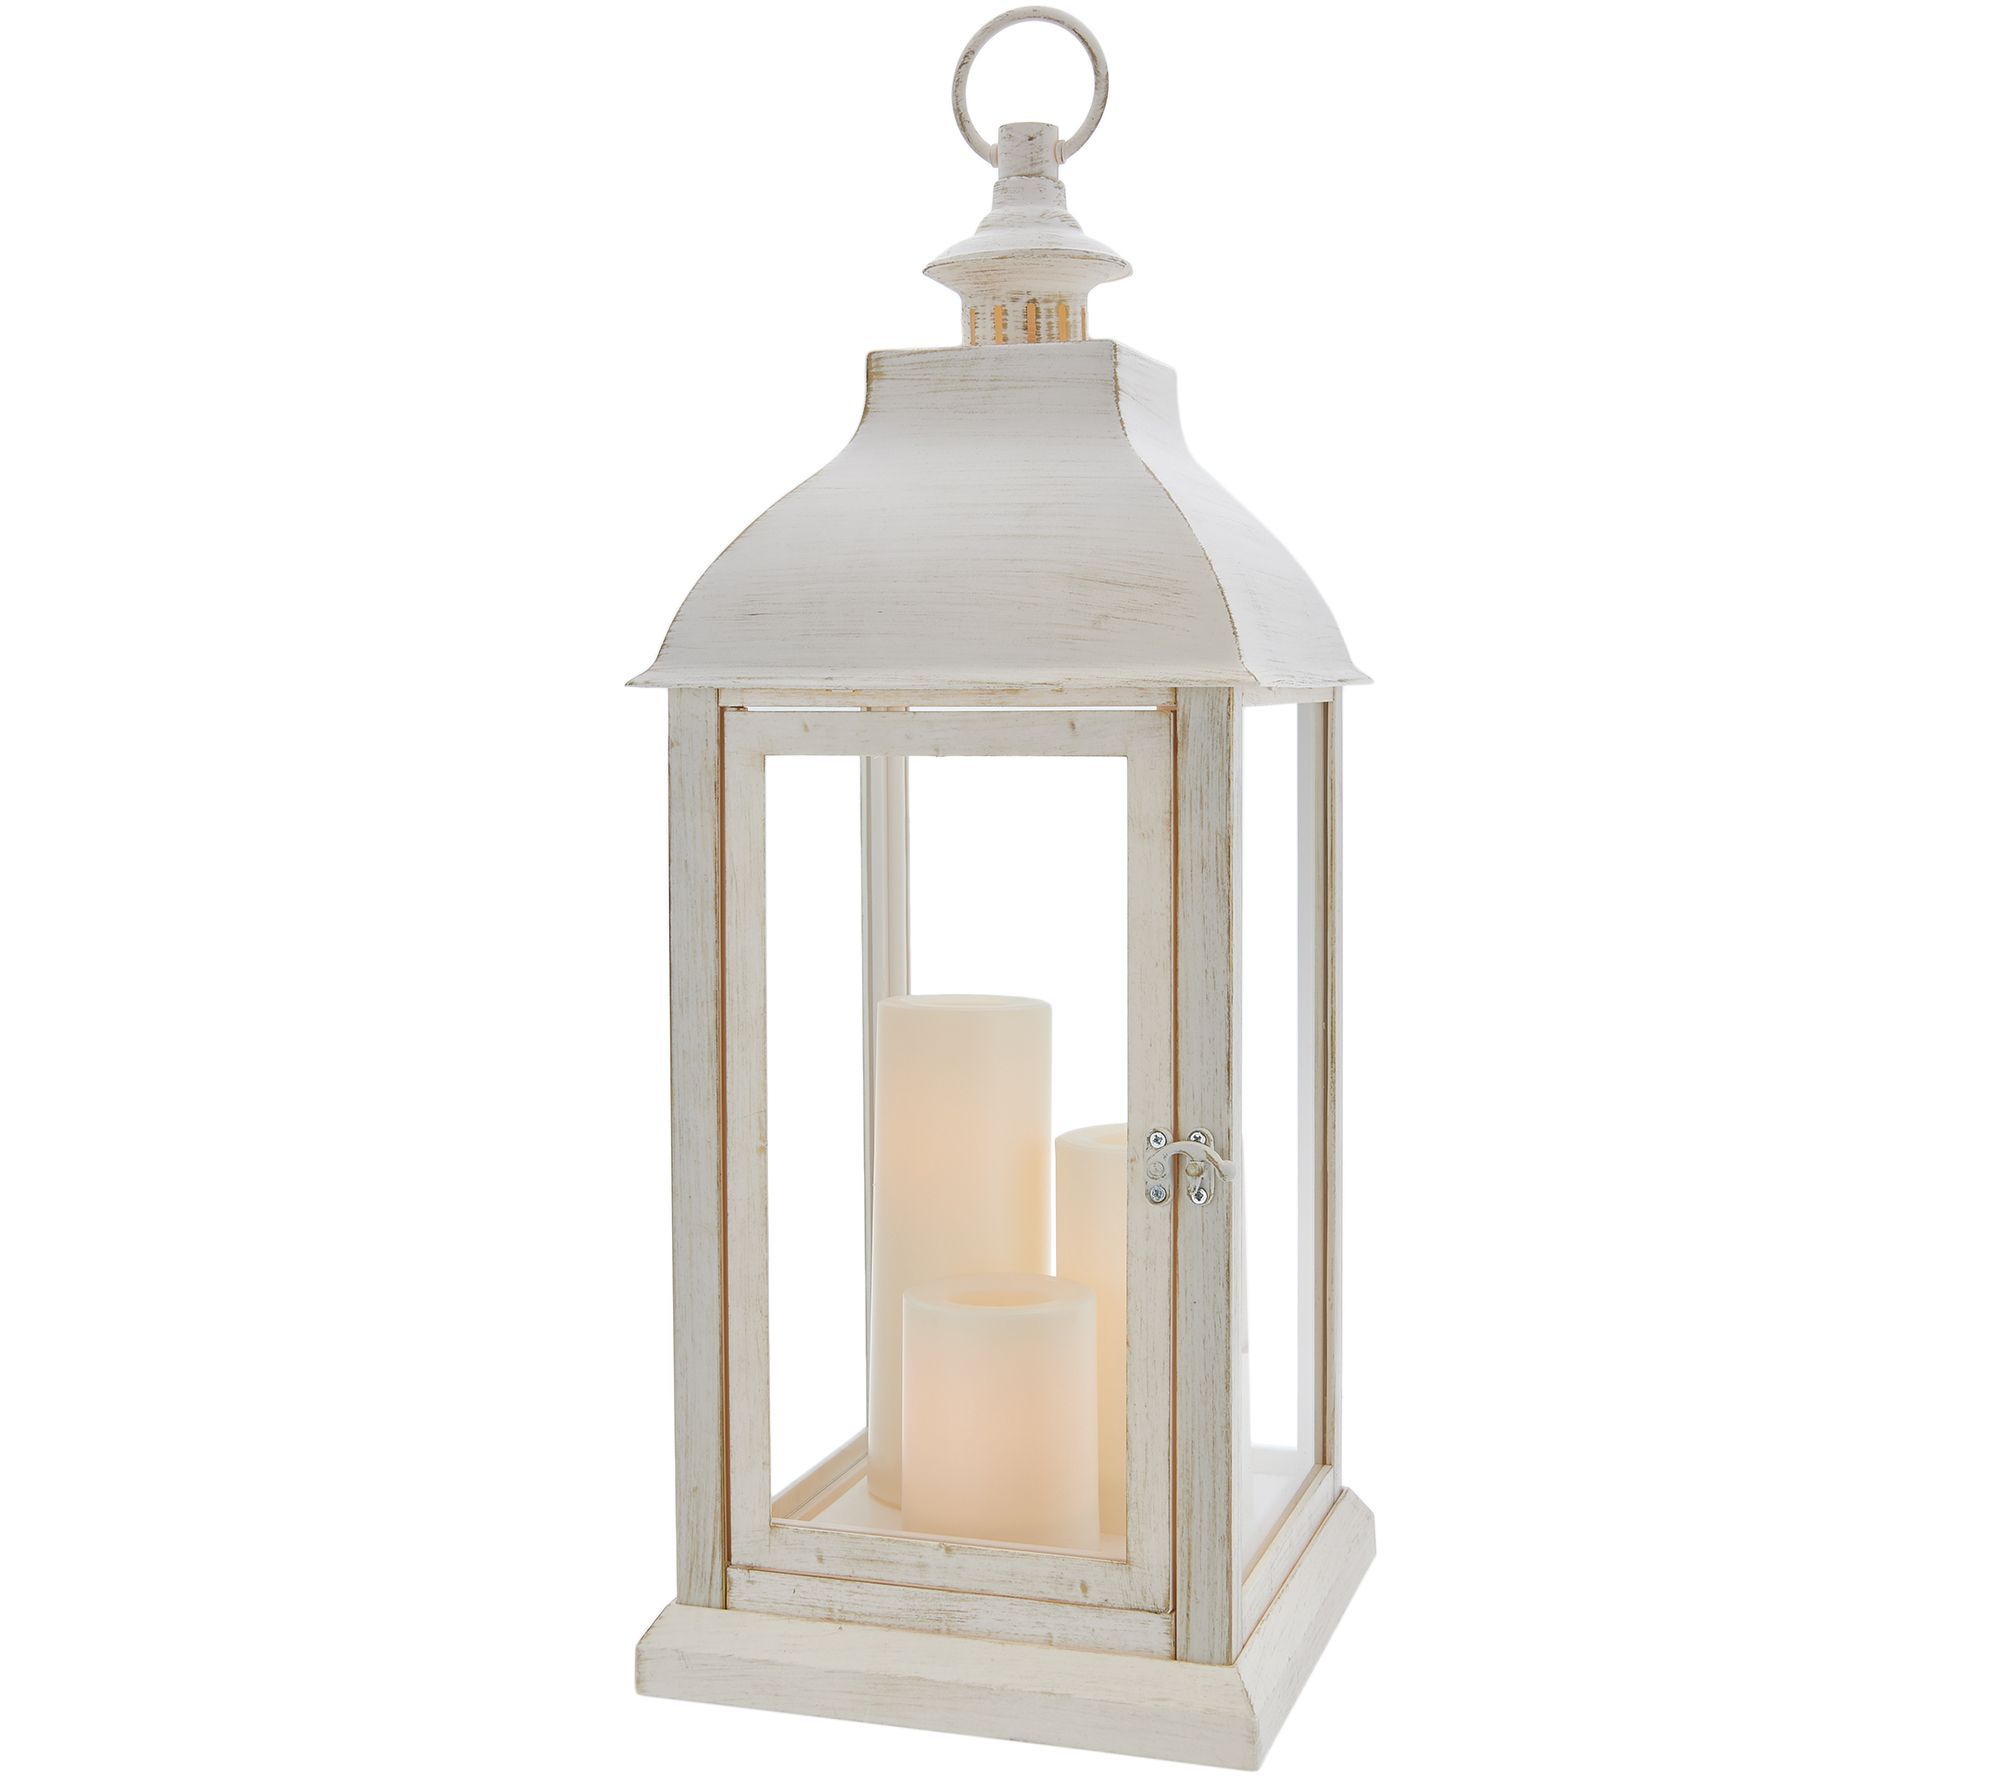 Candle Impressions Large Indoor/ Outdoor Lantern with 3 Candles | QVC